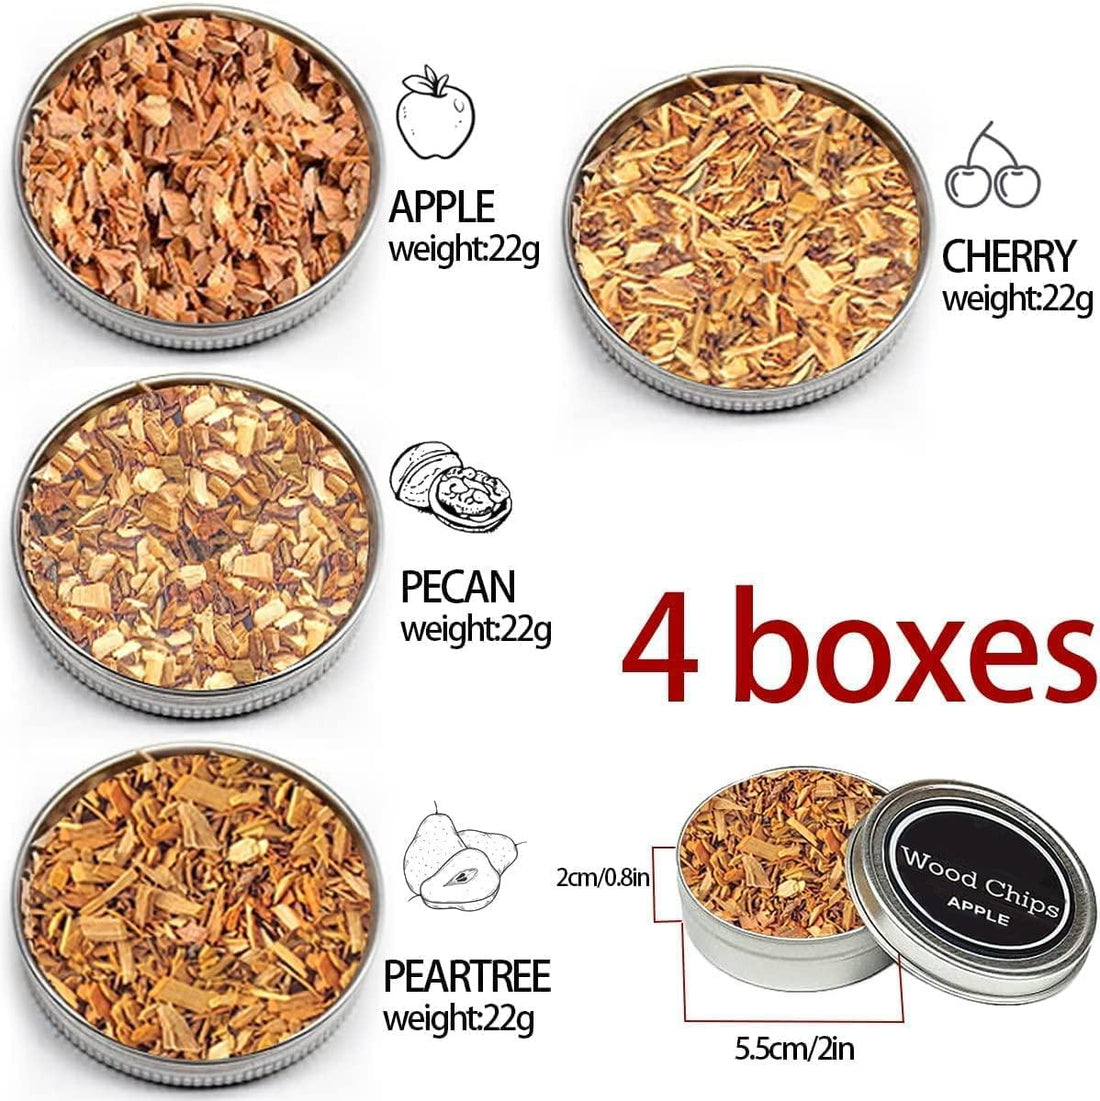 Wood Chips for Cocktail Smoker, Cherry, Apple, Pecan and Pear Tree 4 Pack Smoke Infuser Wood Chips - Gifts-Australia